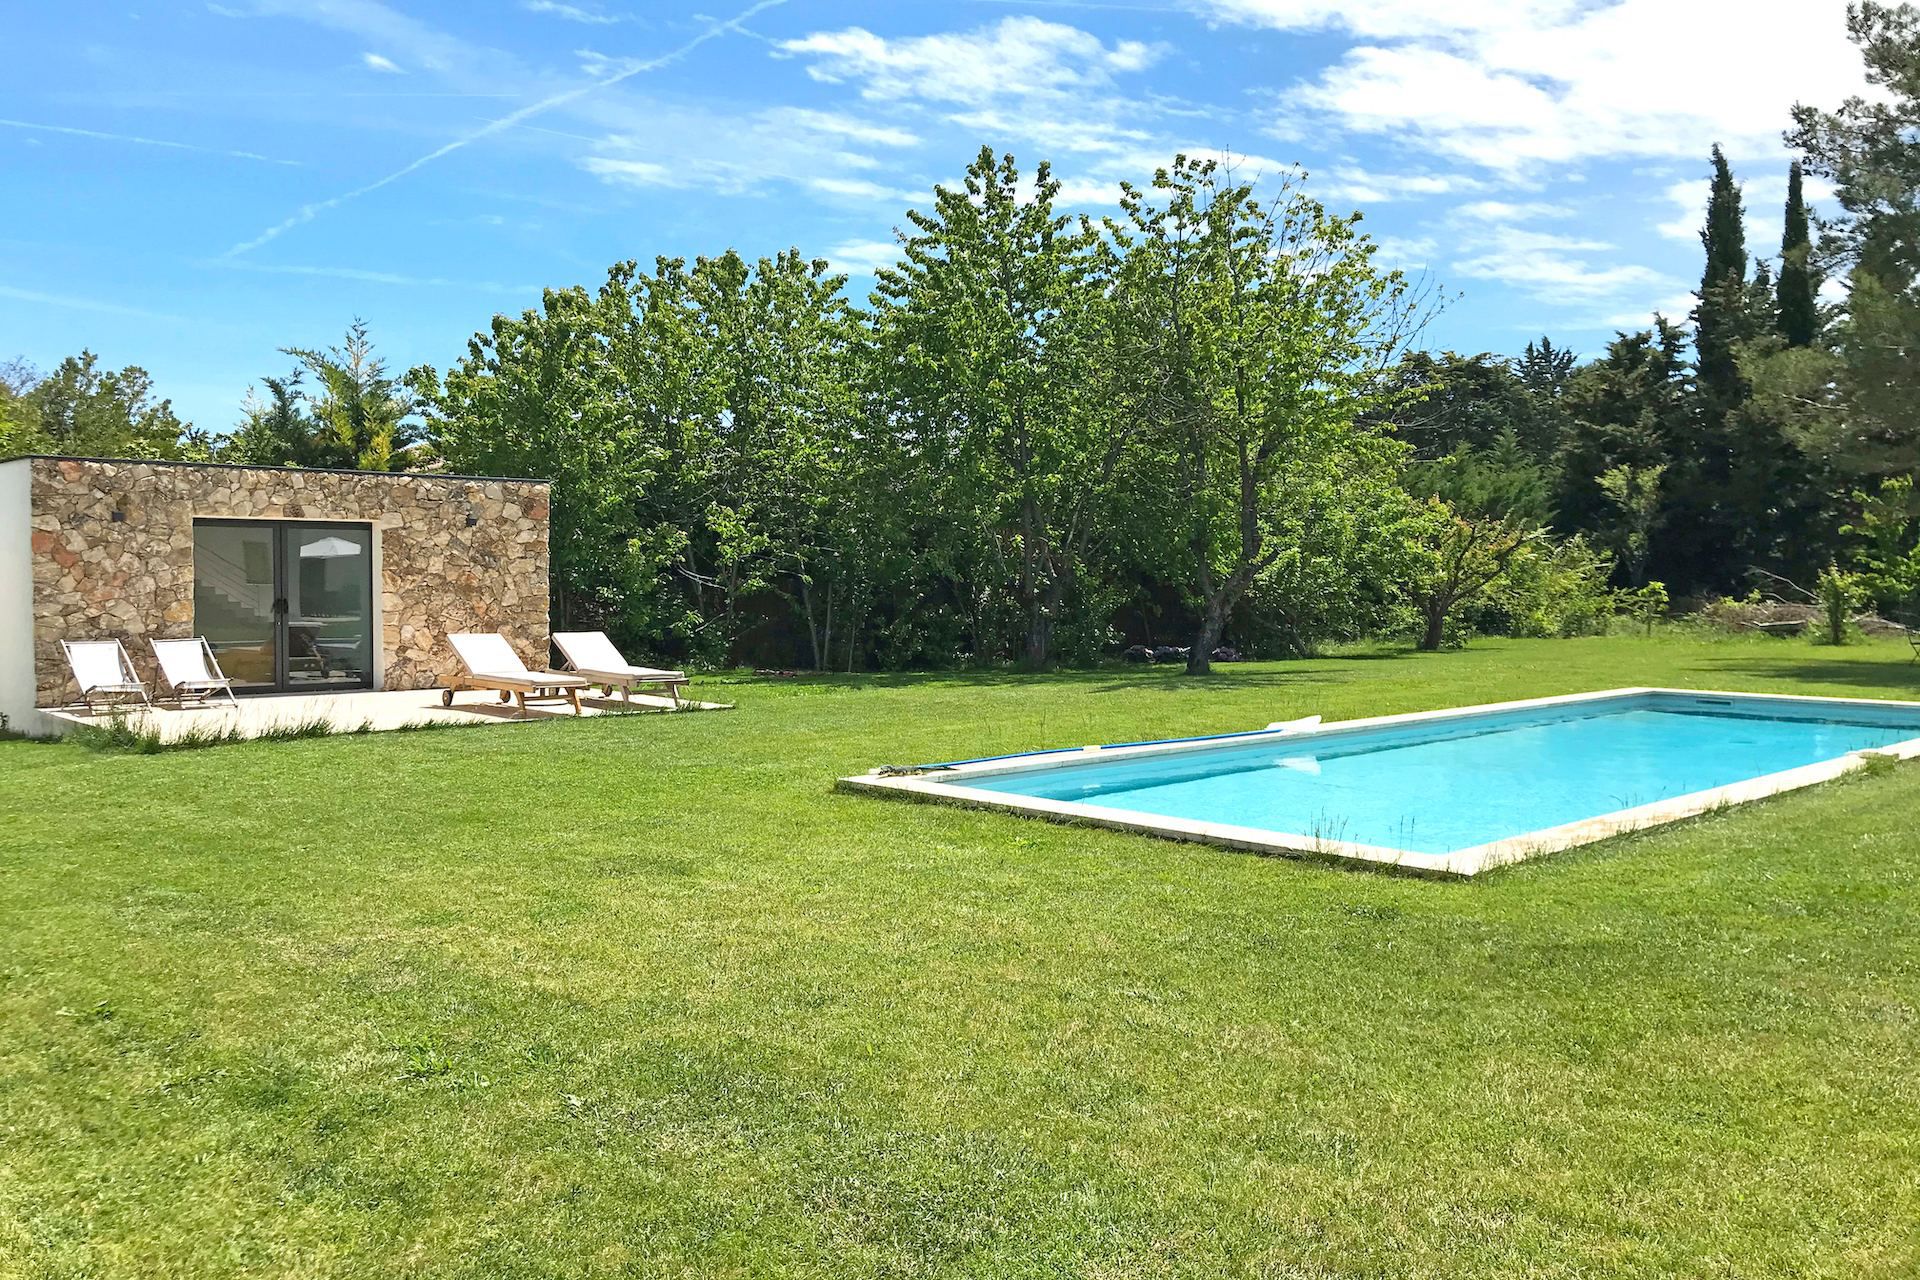 Méditerranée Location House with Private pool in Aix-en-Provence, Provence